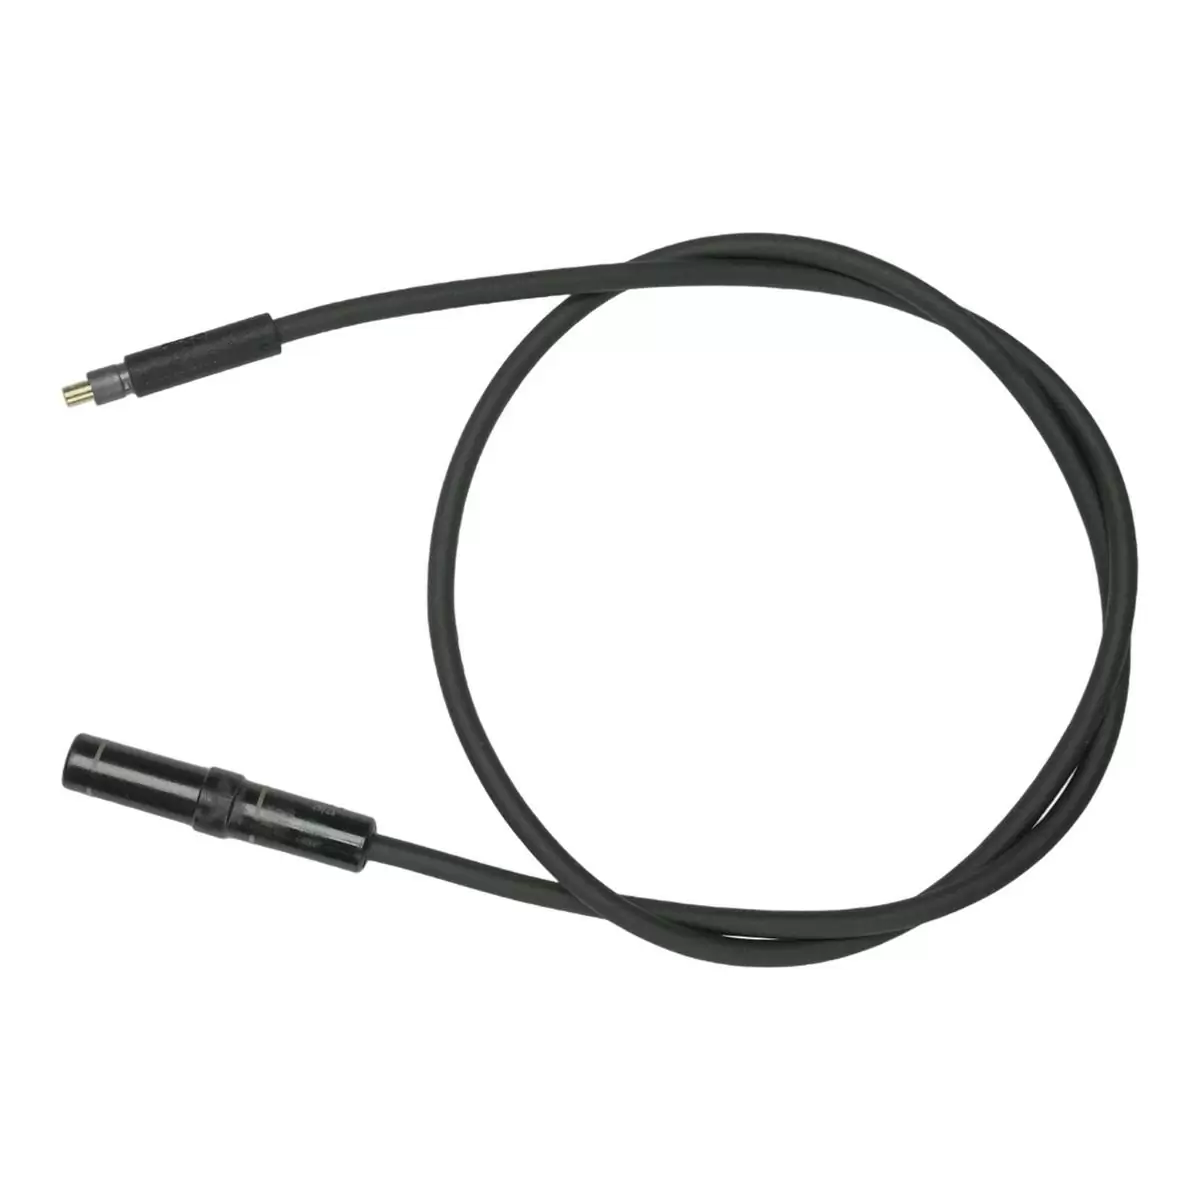 E-bike Speed Sensor Without Magnet For RIDE 60 600mm - image